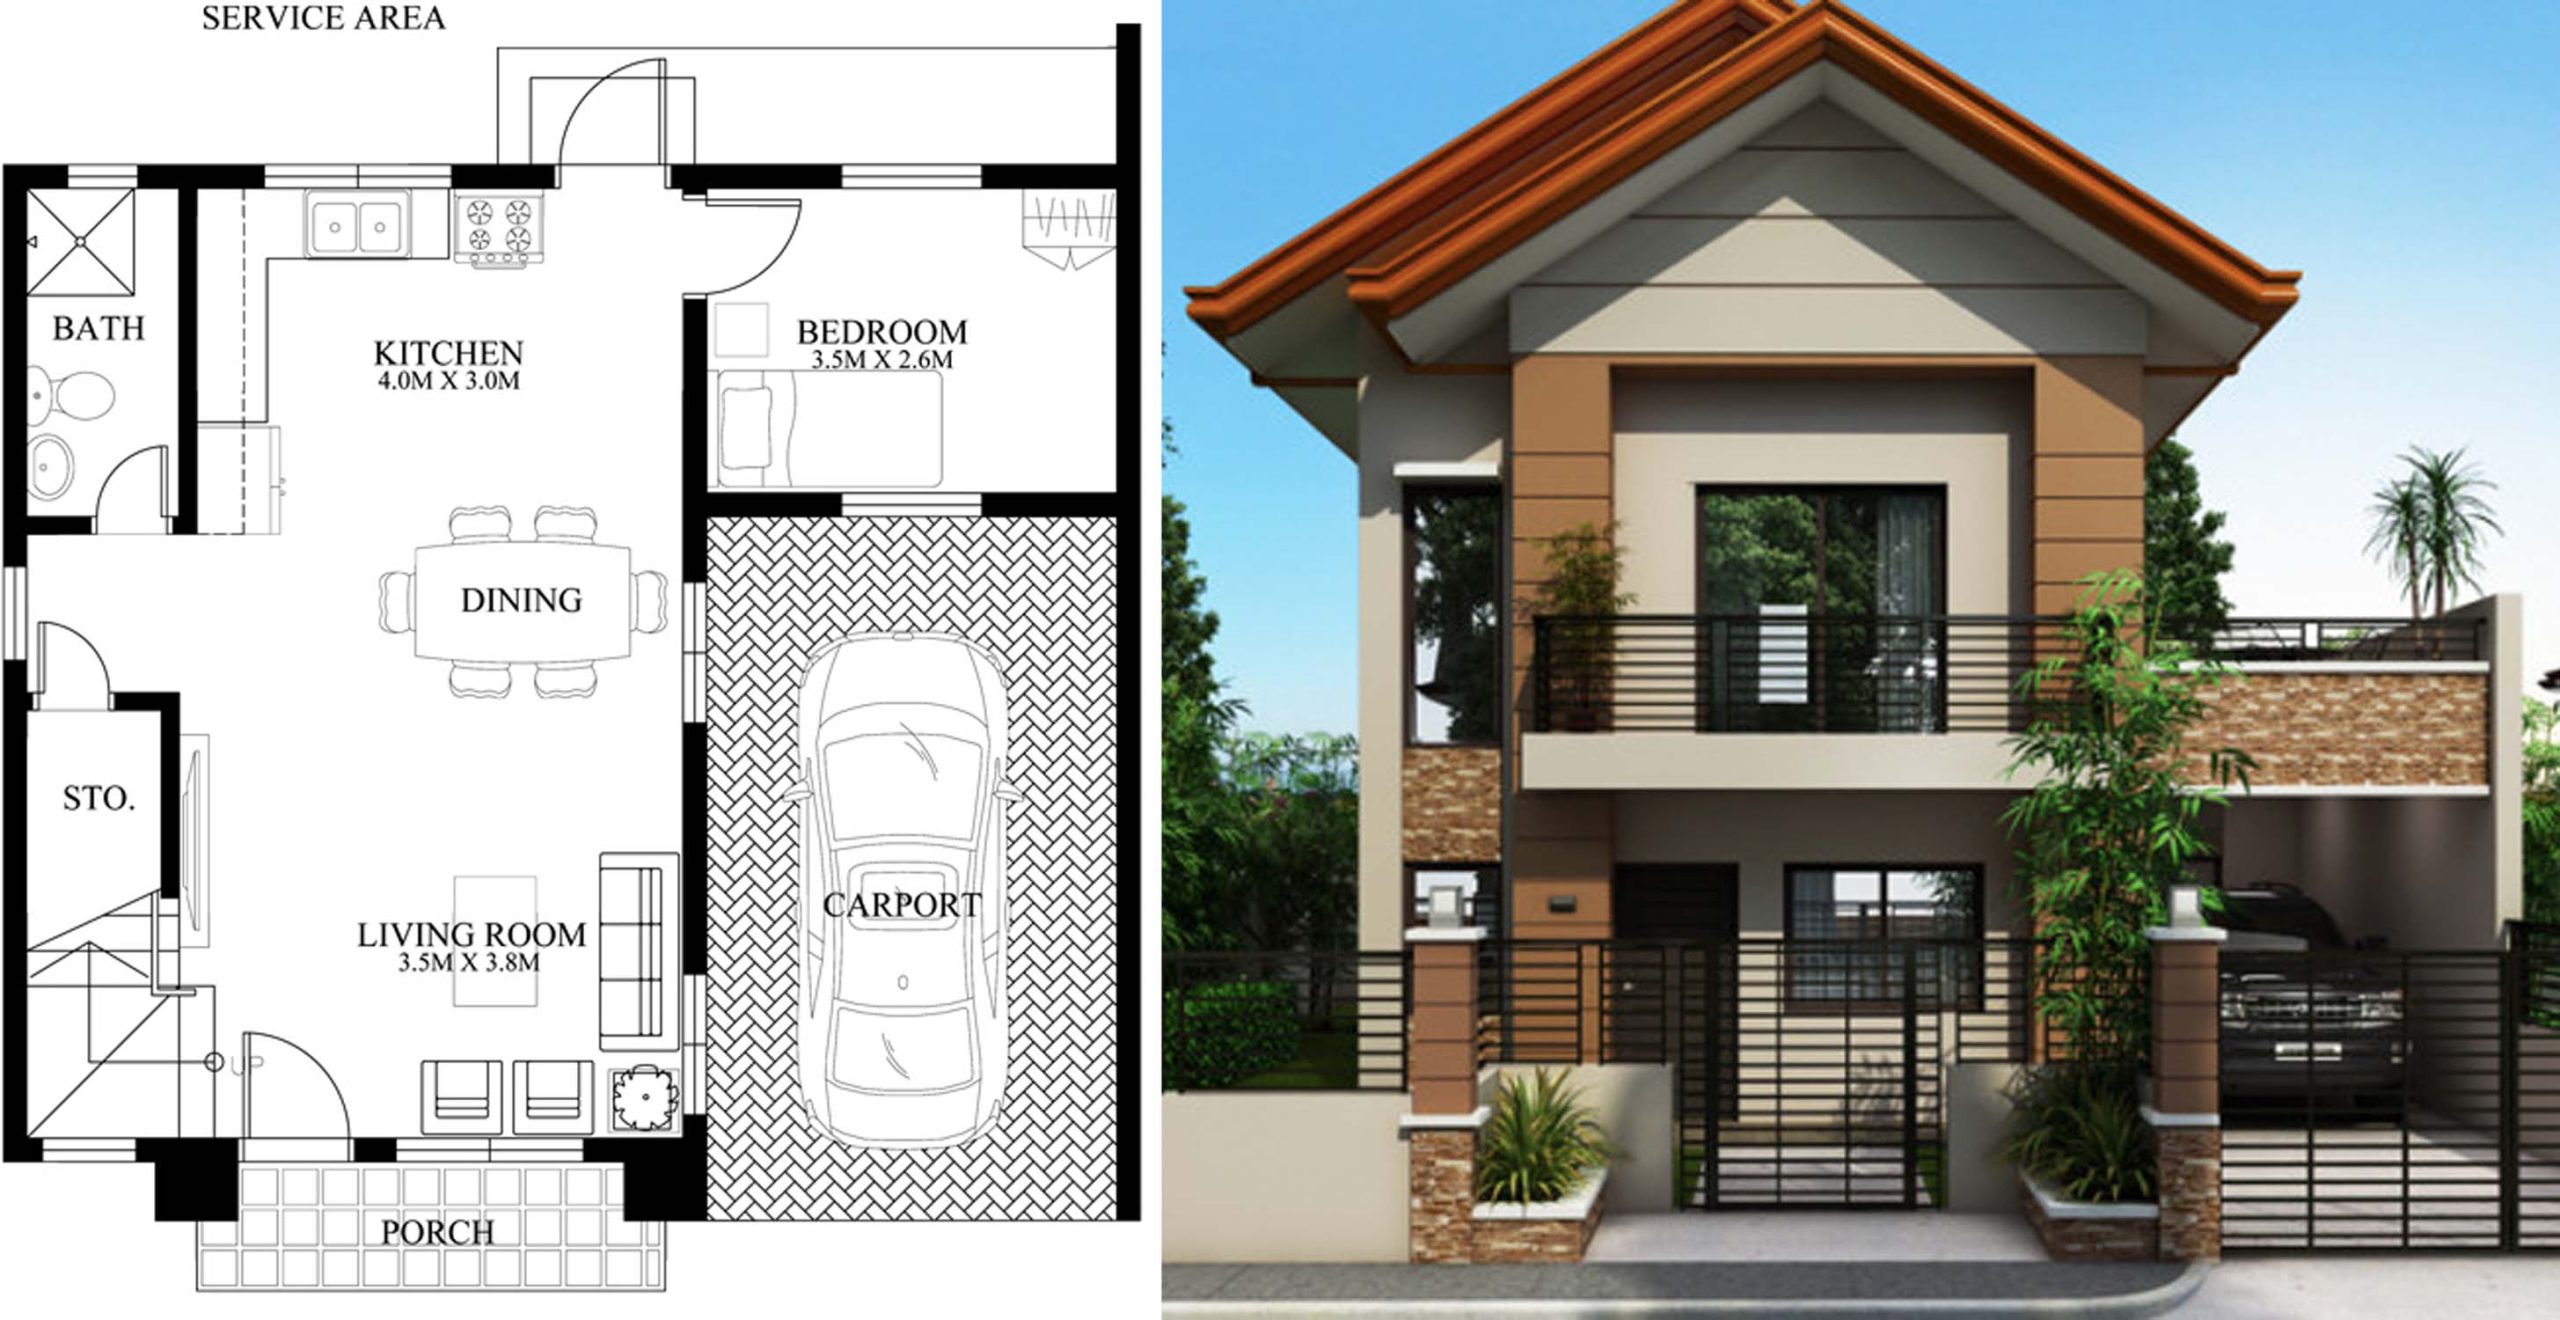 Proposed Double Storey Villa Plan Engineering Discoveries